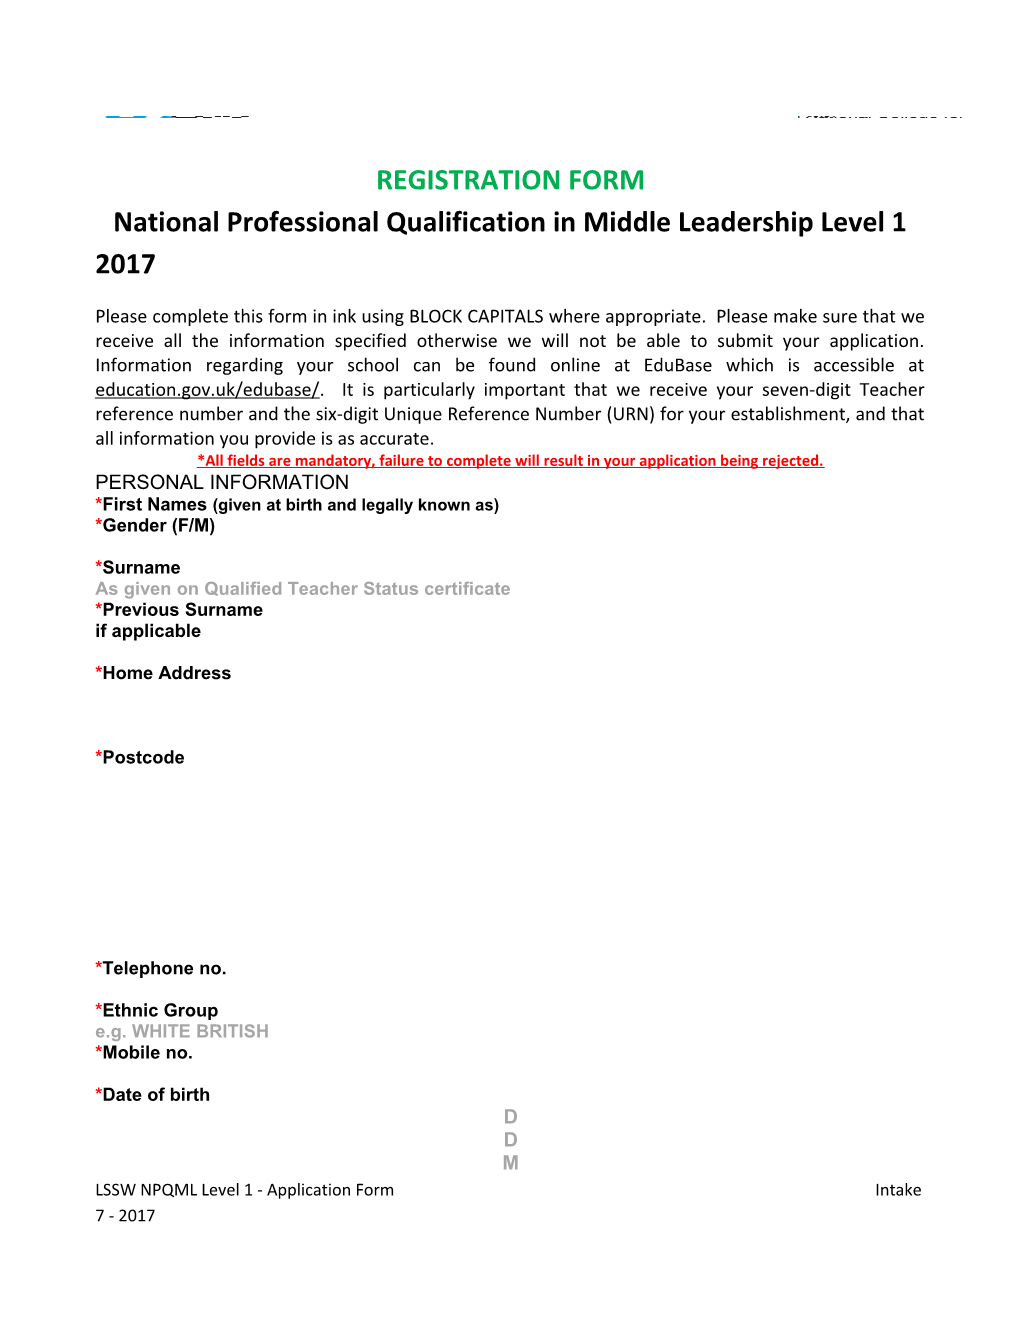 National Professional Qualification in Middle Leadership Level 1